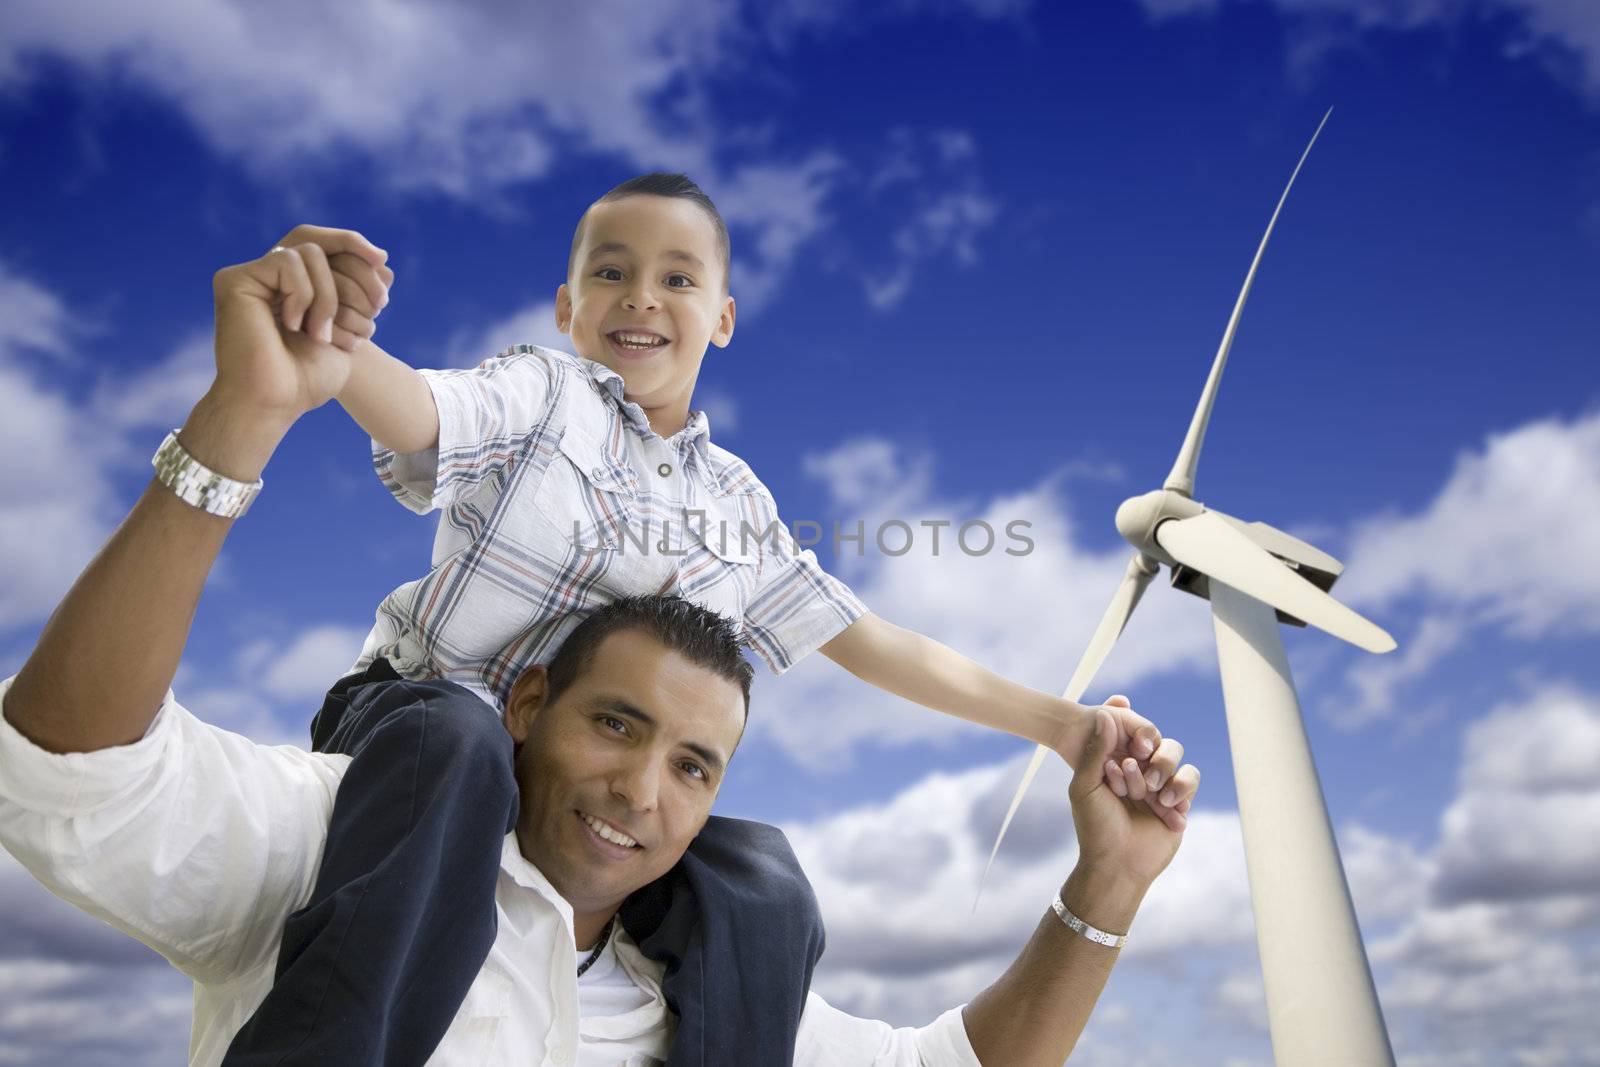 Happy Hispanic Father and Son with Wind Turbine Over Blue Sky.